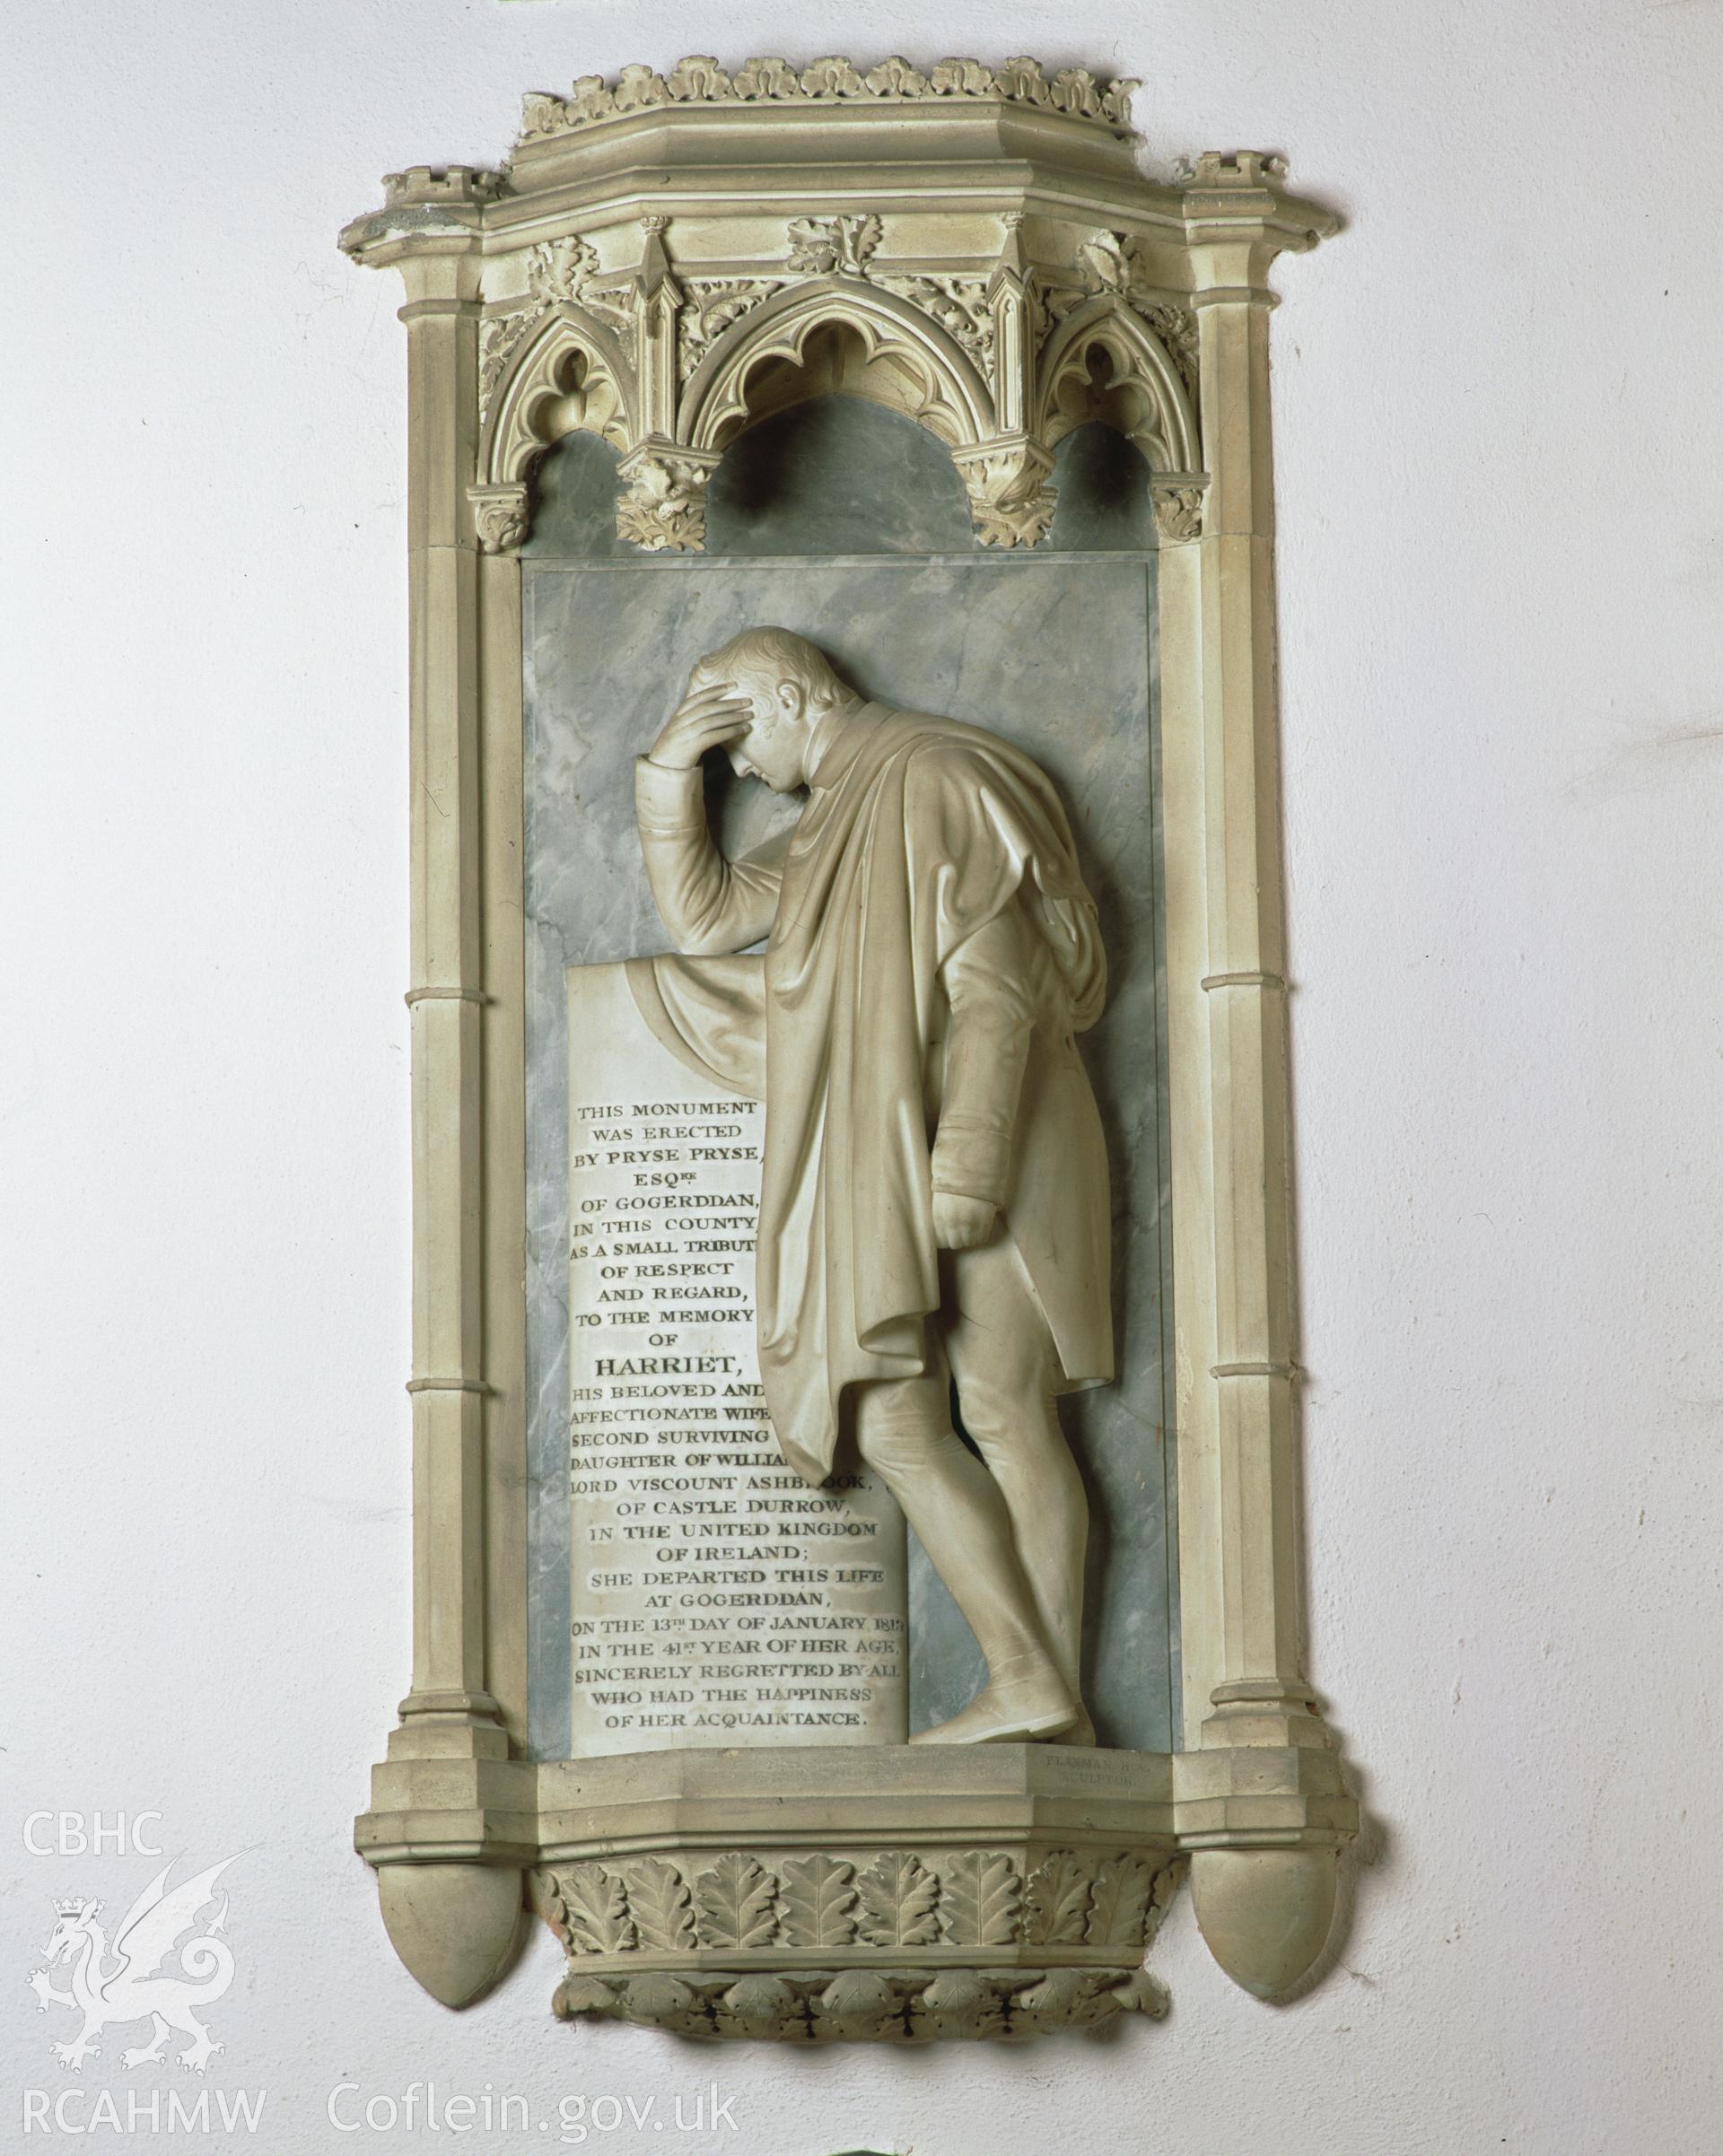 Colour transparency showing monument to Harriet Pryse, situated in Llanbadarn Fawr Church, produced by Iain Wright, June 2004.